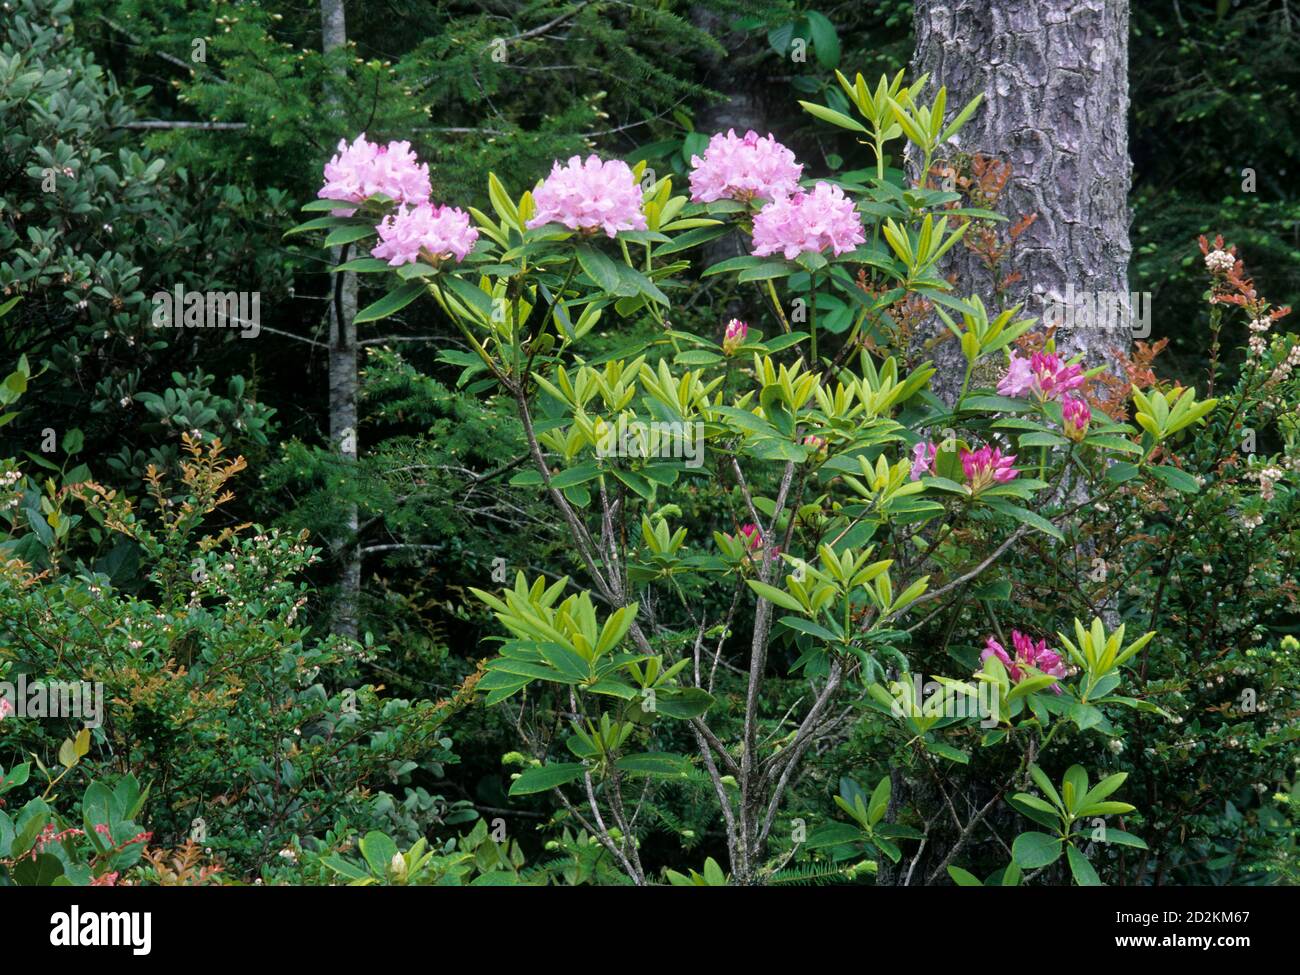 Pacific rhododendron (Rhododendron macrophyllum) in Siltcoos River area, Oregon Dunes National Recreation Area, Oregon Stock Photo